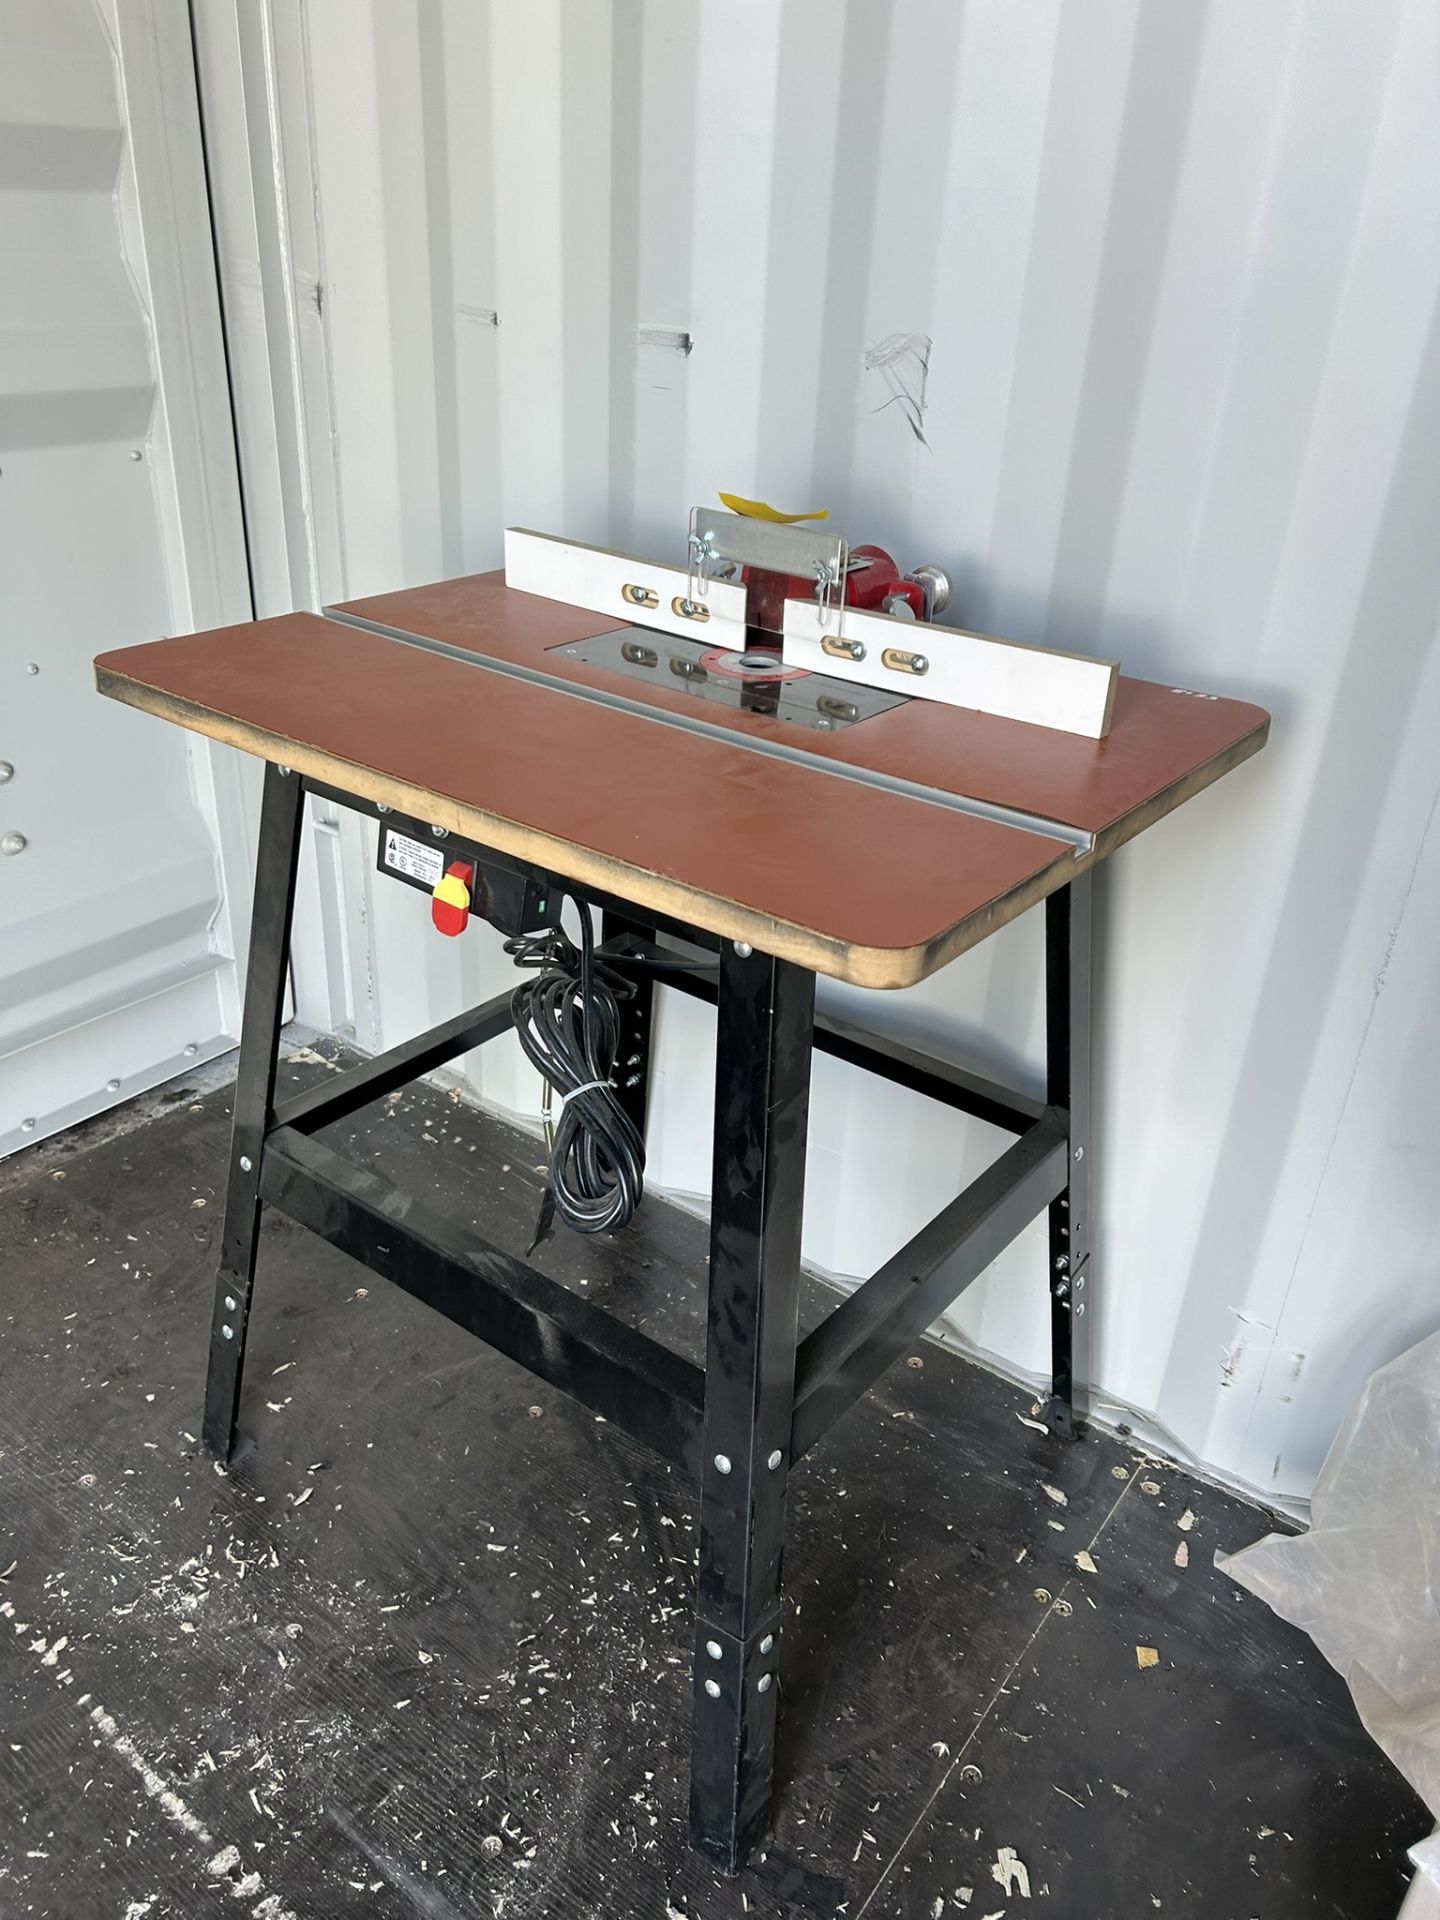 FREUD ROUTER TABLE W/SEARS ROUTER